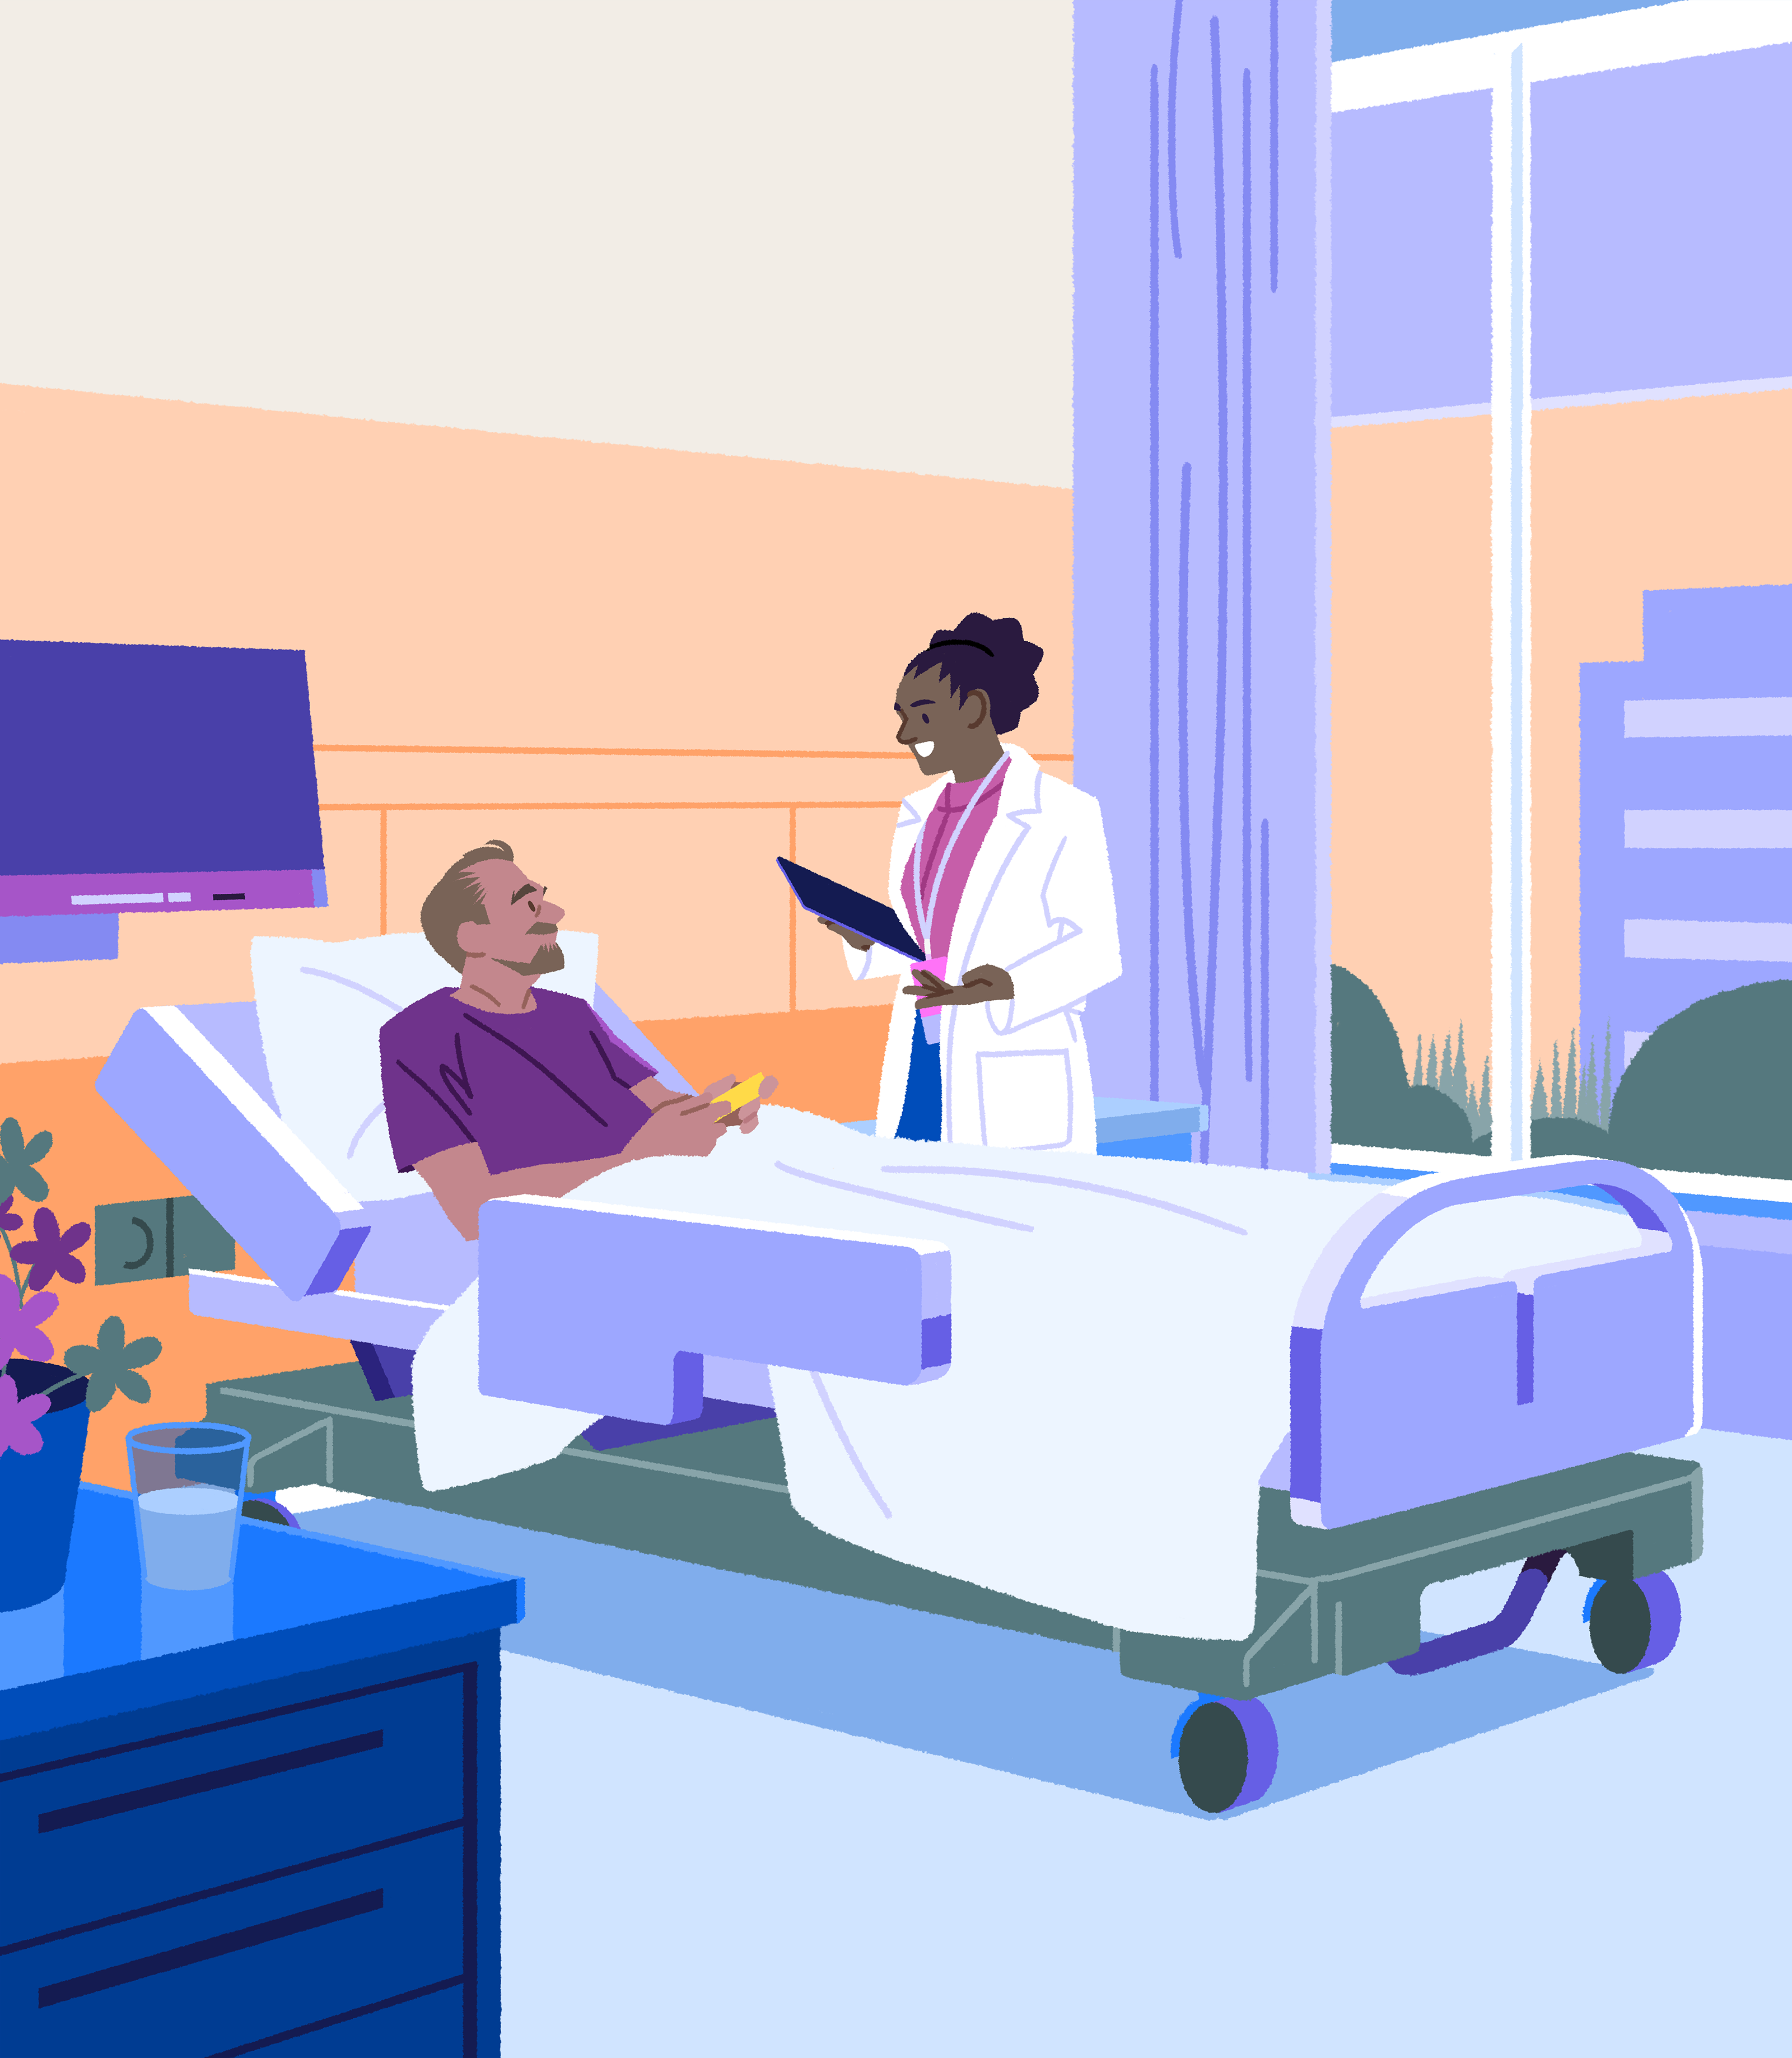 Illustration of a health-system pharmacist attending to a patient in a hospital room with an orange-hued sky visible through the window.